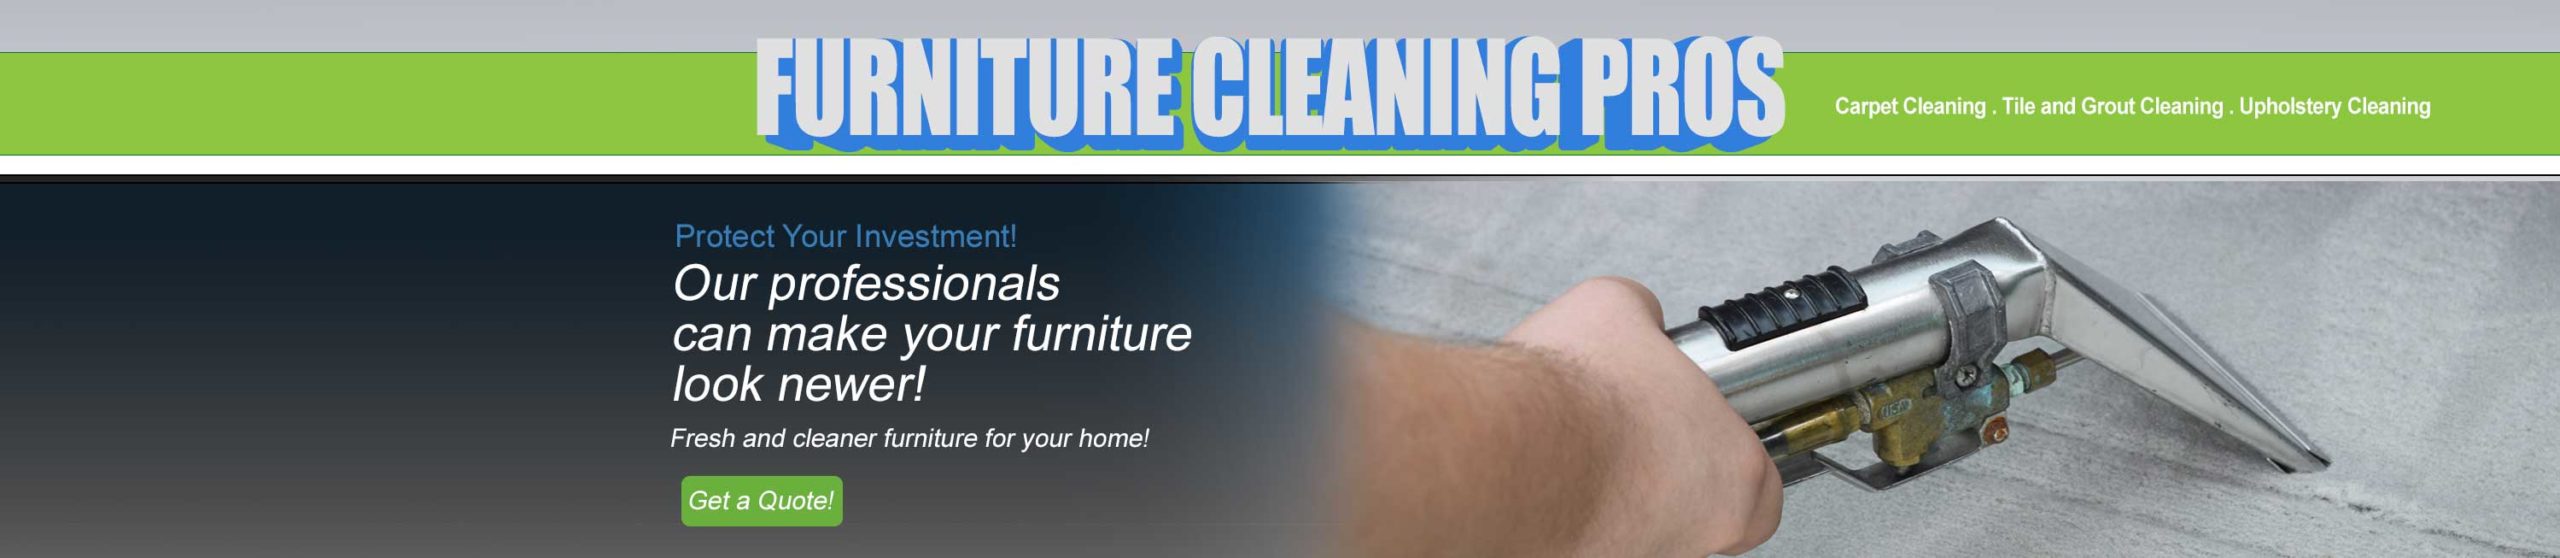 Furniture and upholstery cleaning in Glendale AZ